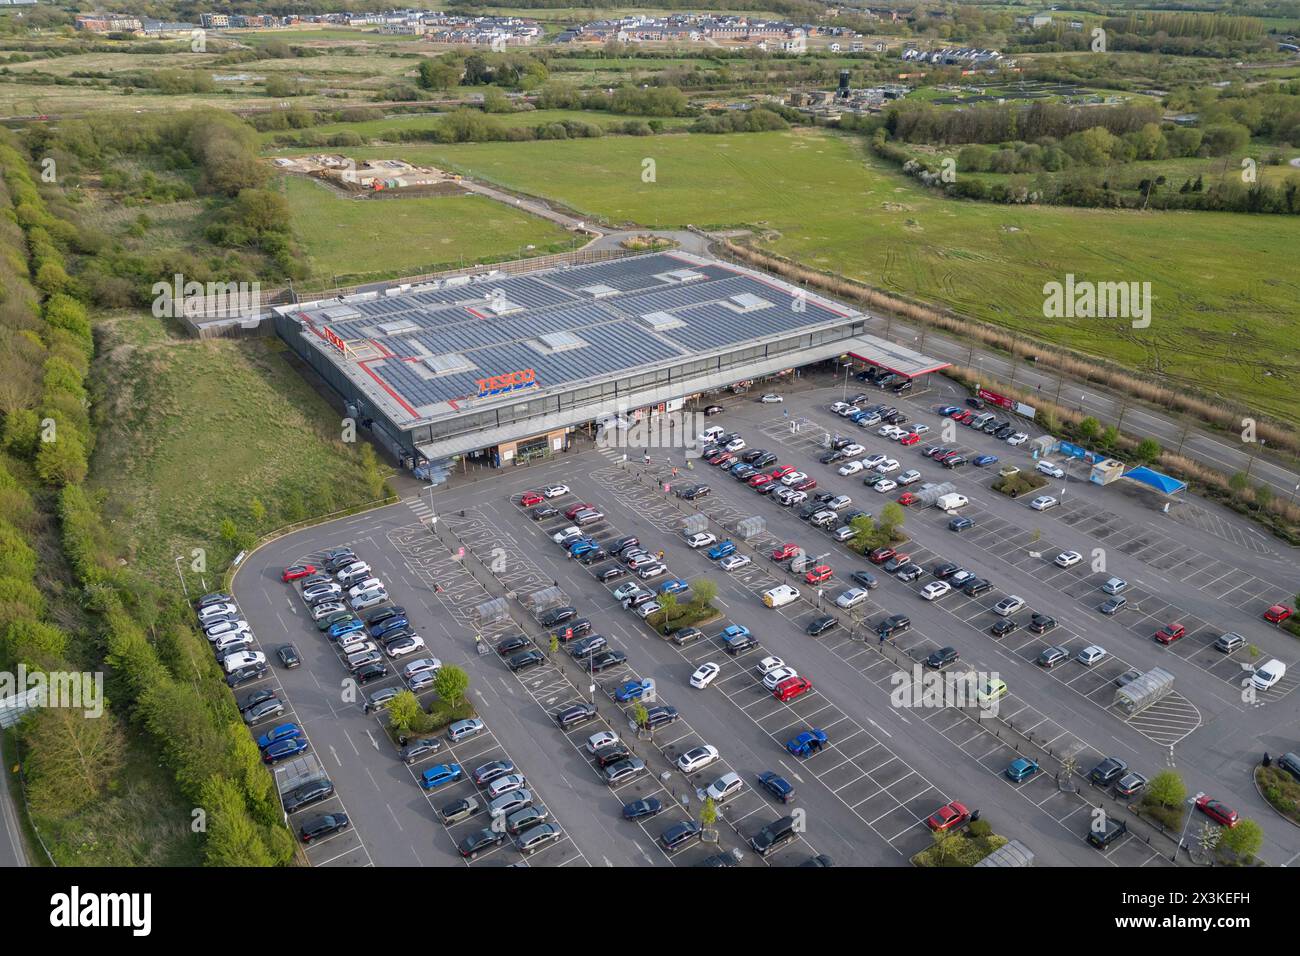 Aerial view of the Tesco Superstore and car park, Bicester, Oxfordshire, UK. Stock Photo